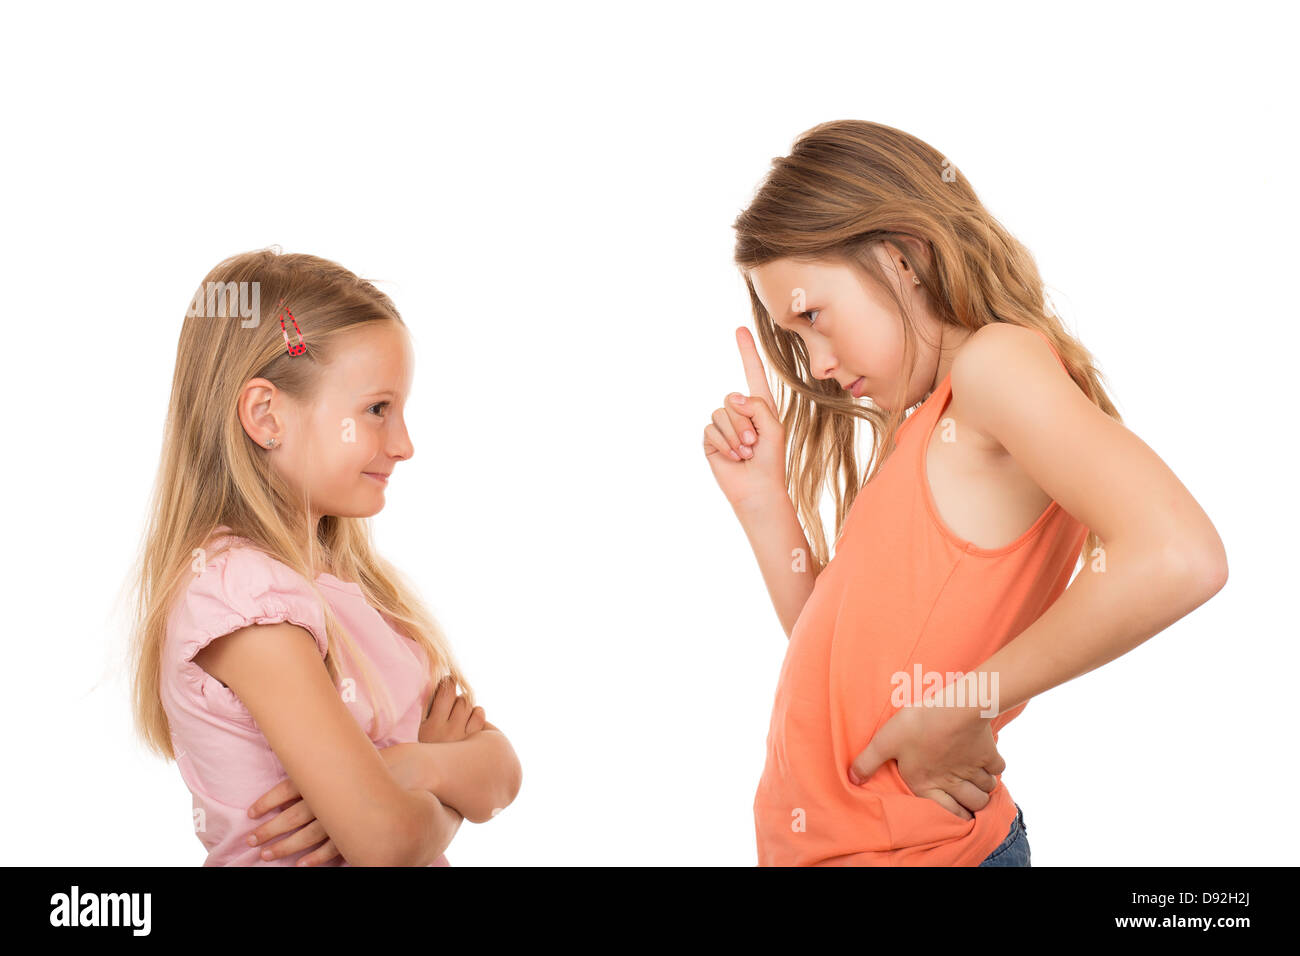 Big sister disagree pointing finger at her little sister because she did a silly, foolish, stupid thing or something wrong. Stock Photo